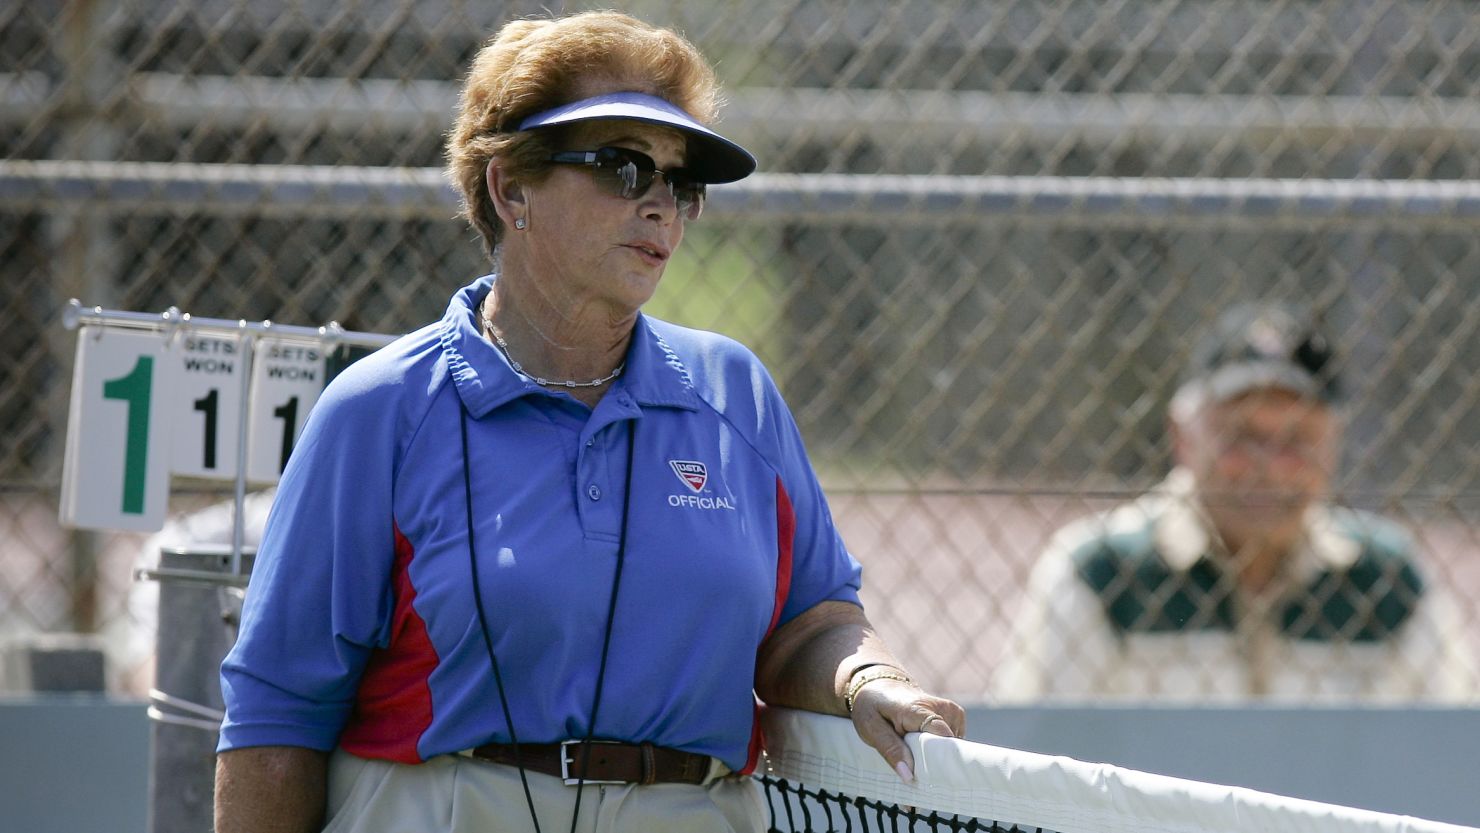 In this photo taken in 2008, tennis referee Lois Goodman is shown while officiating a CIF tennis tournament. 